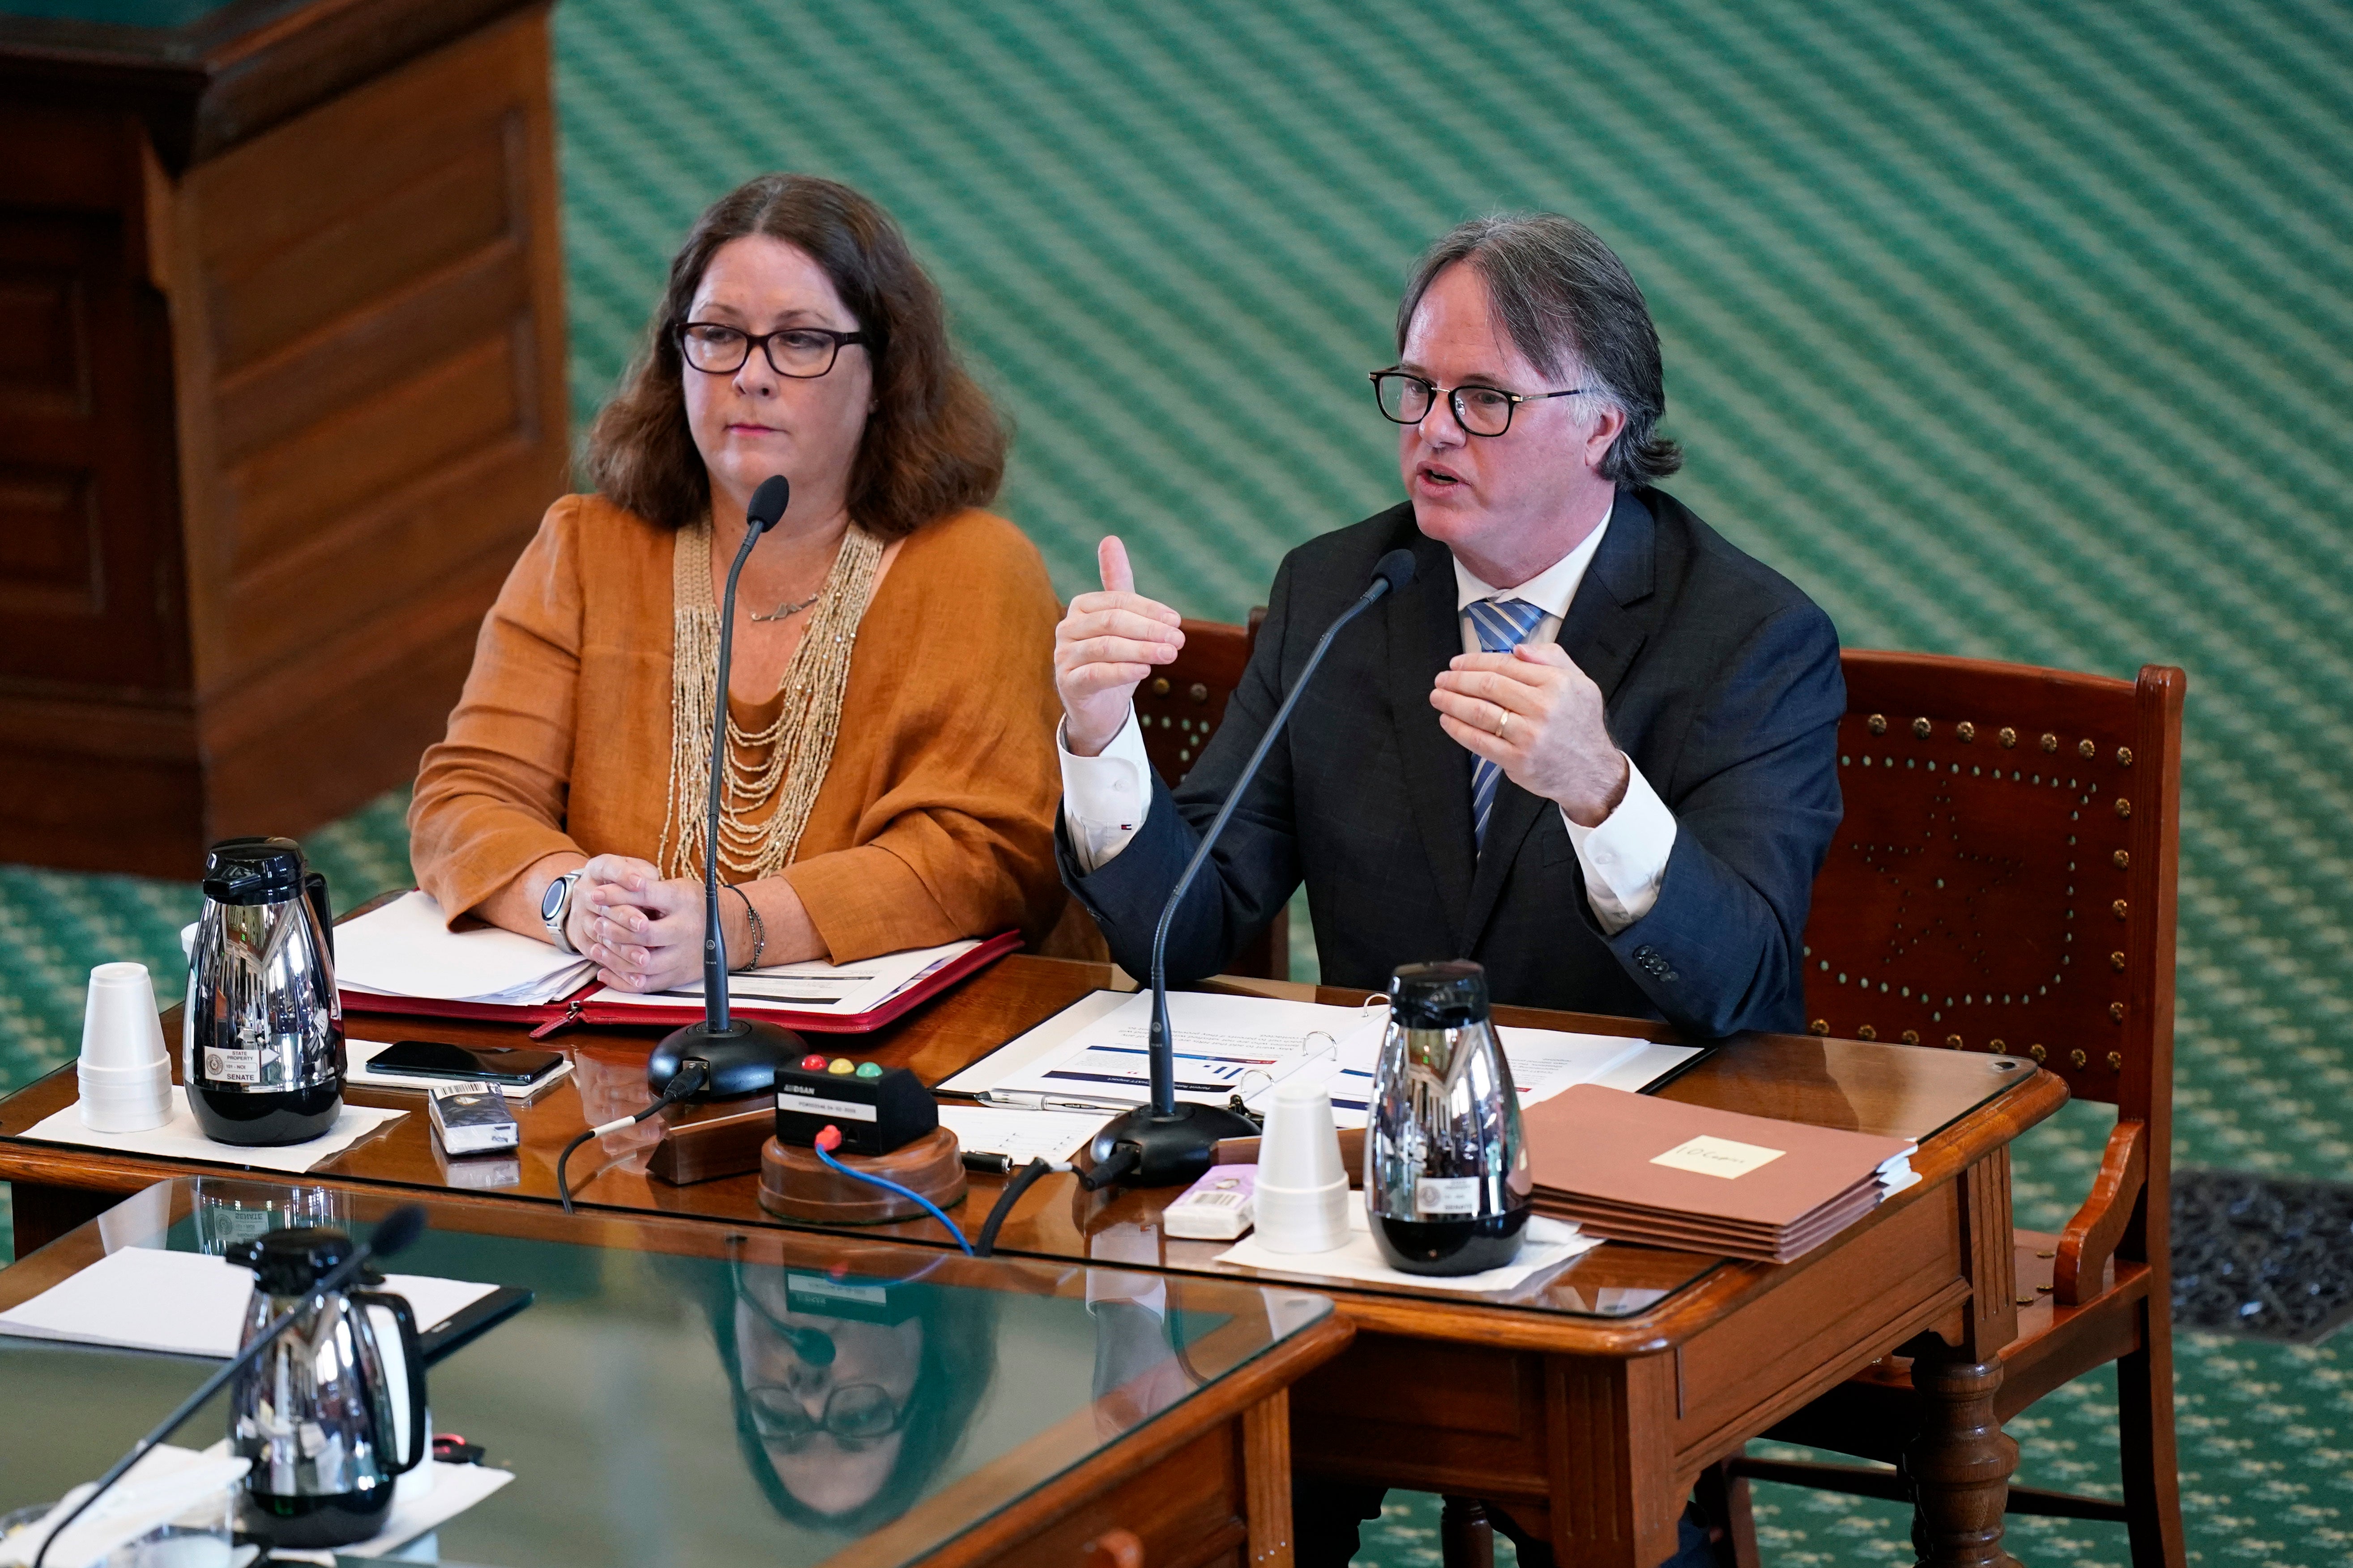 Dr David Lakey and Dr Laurel Williams testify during the second public hearing on Uvalde in the Texas Senate